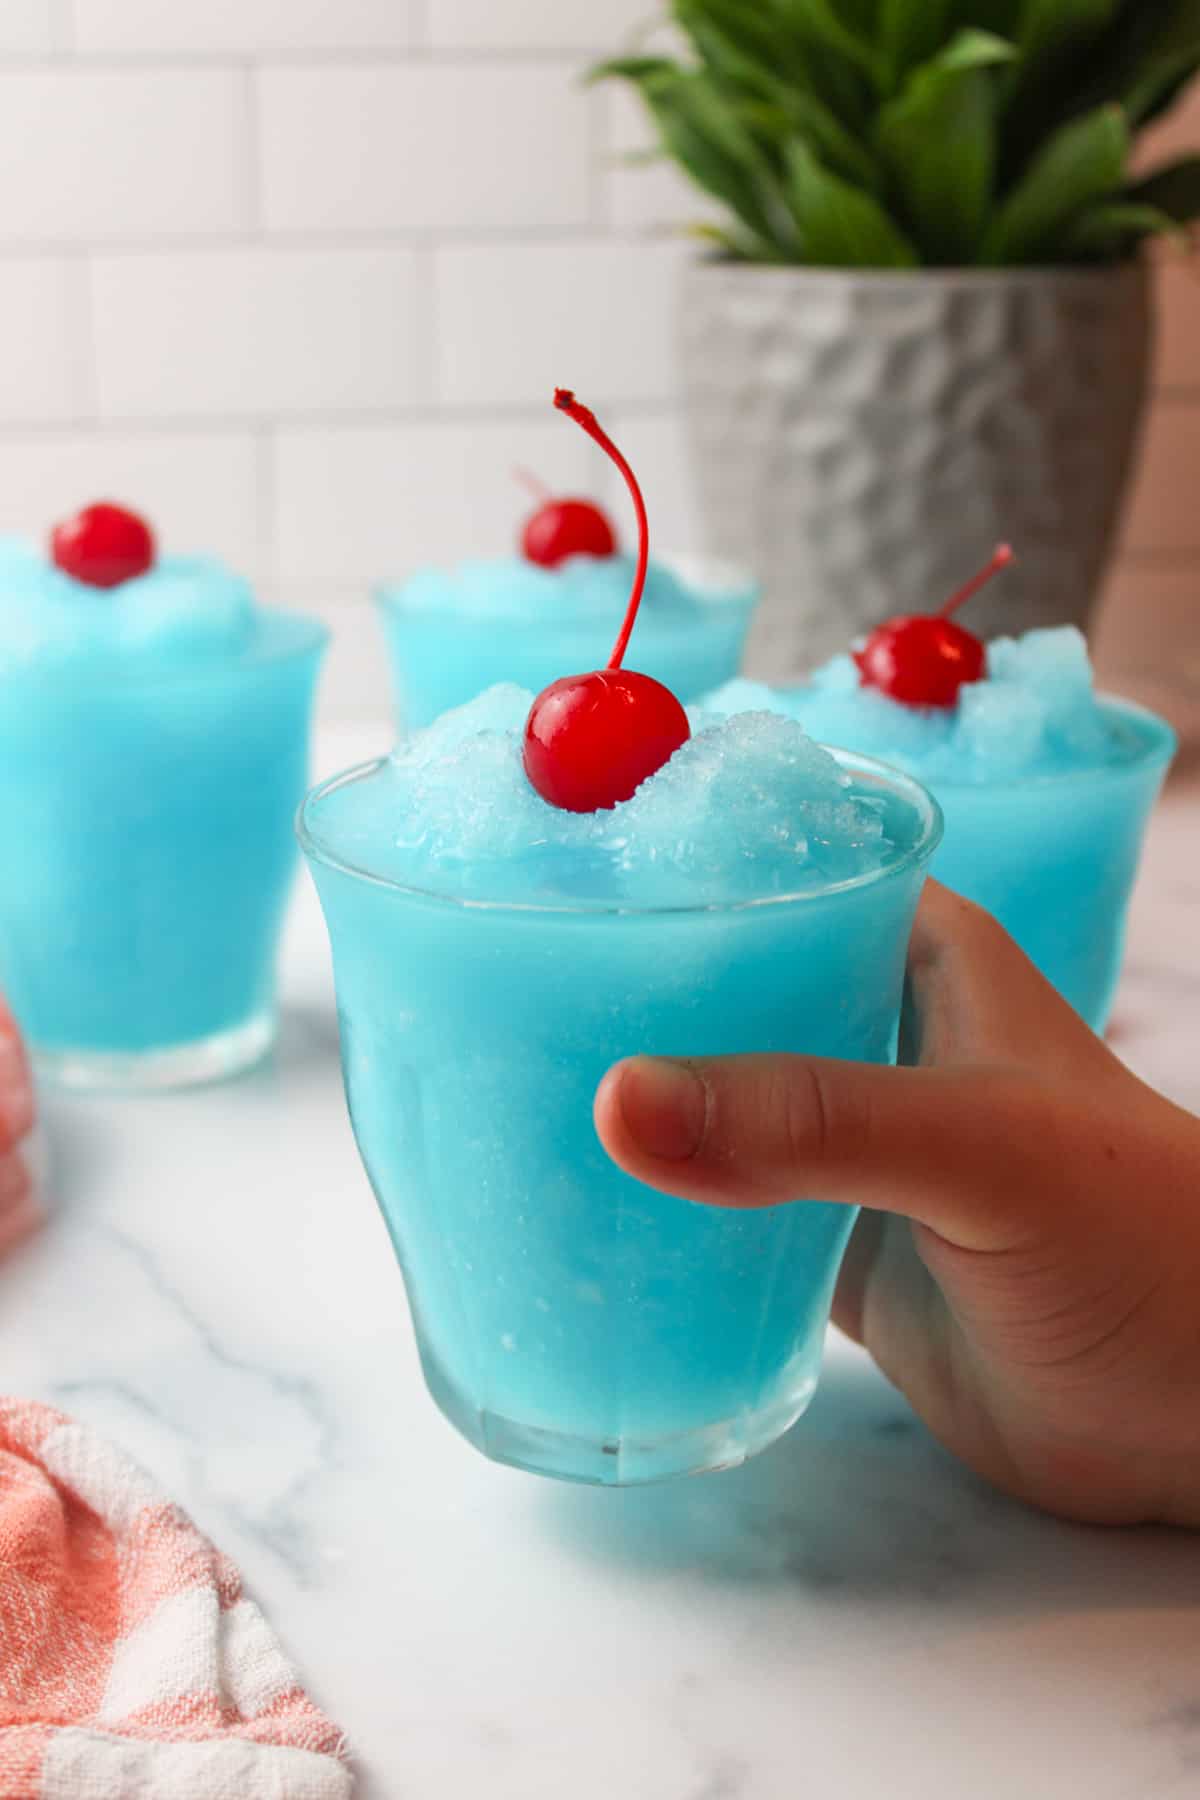 a hand holding up a glass of blue kool aid slushie with a cherry on top